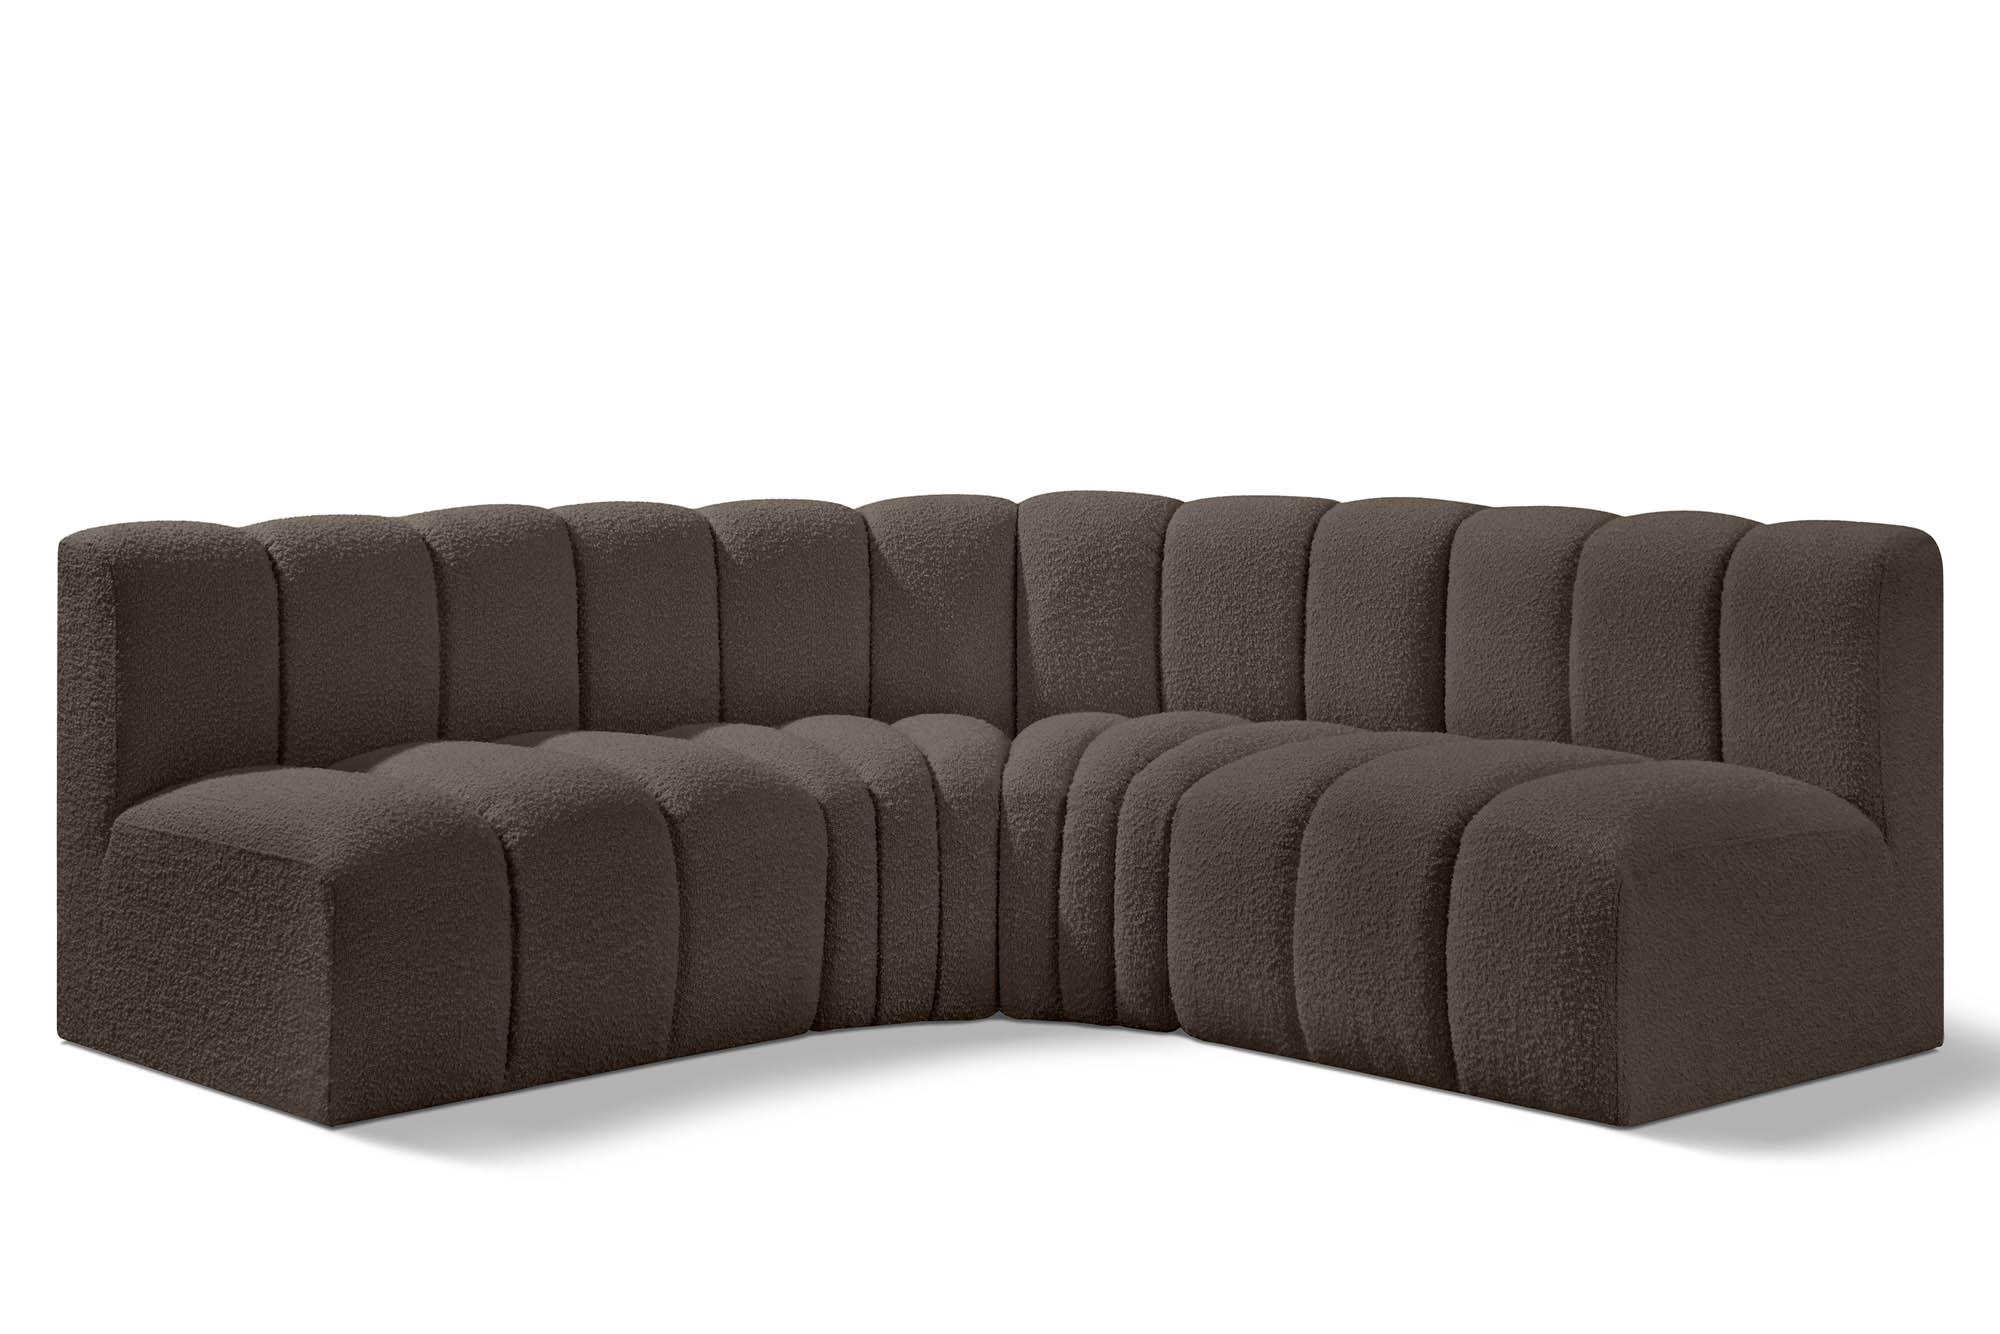 Contemporary, Modern Modular Sectional Sofa ARC 102Brown-S4B 102Brown-S4B in Brown 